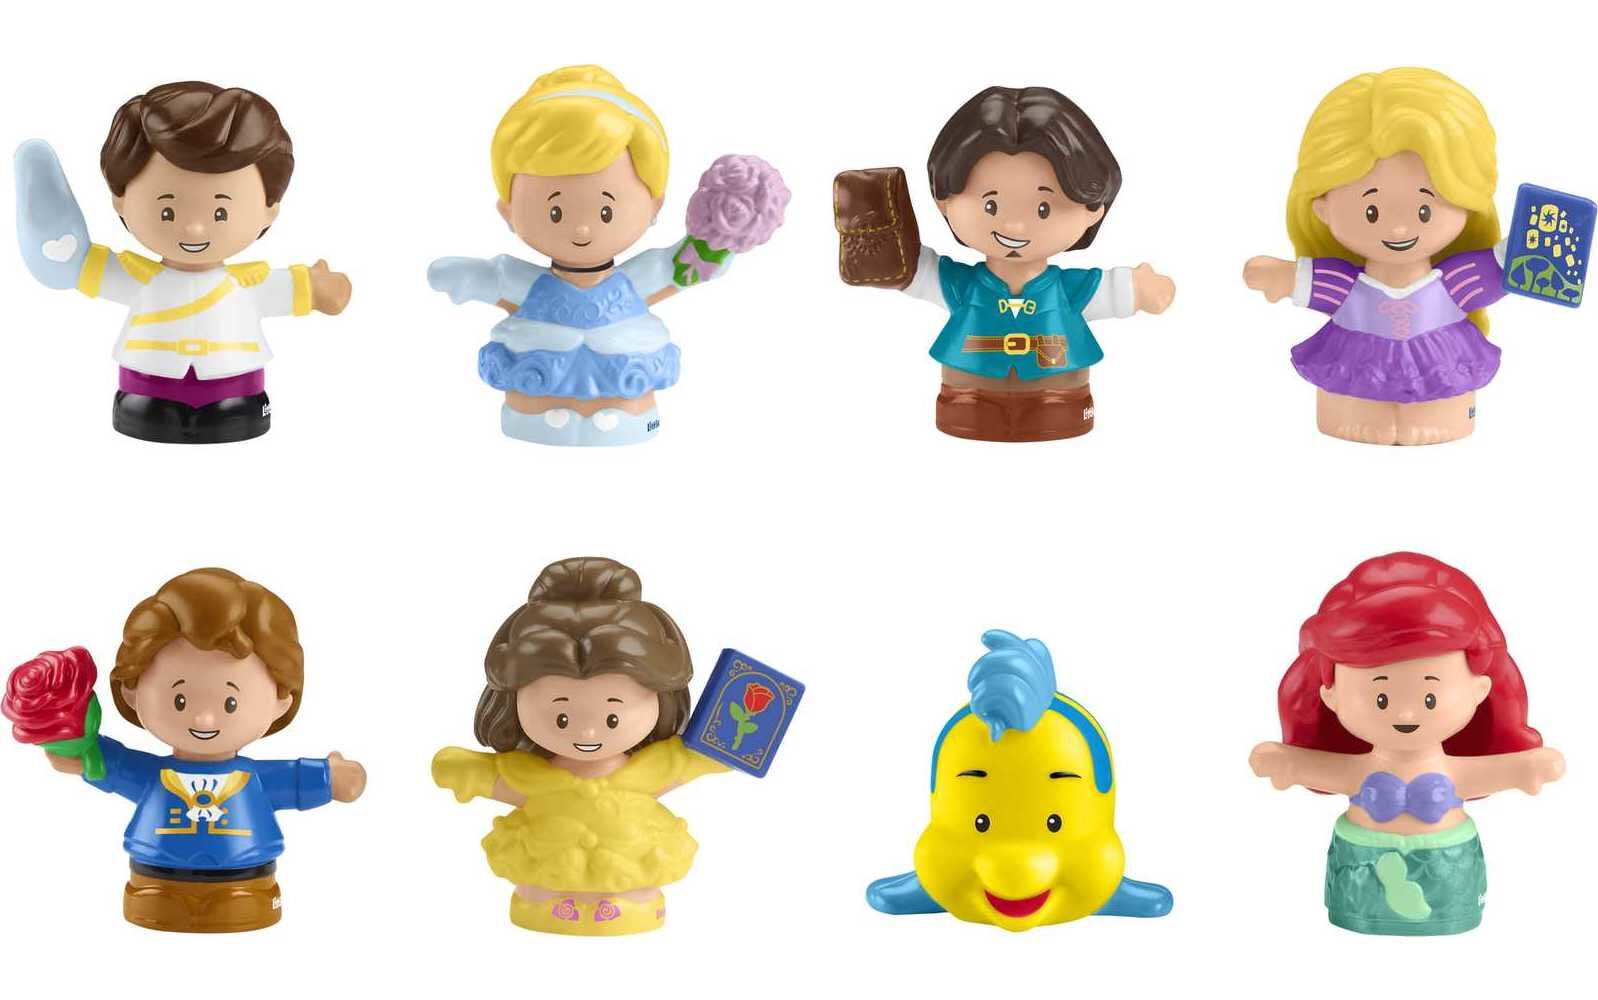 Disney Princess Toddler Toys Little People Prince and Princess Figure Pack, 8 Pieces